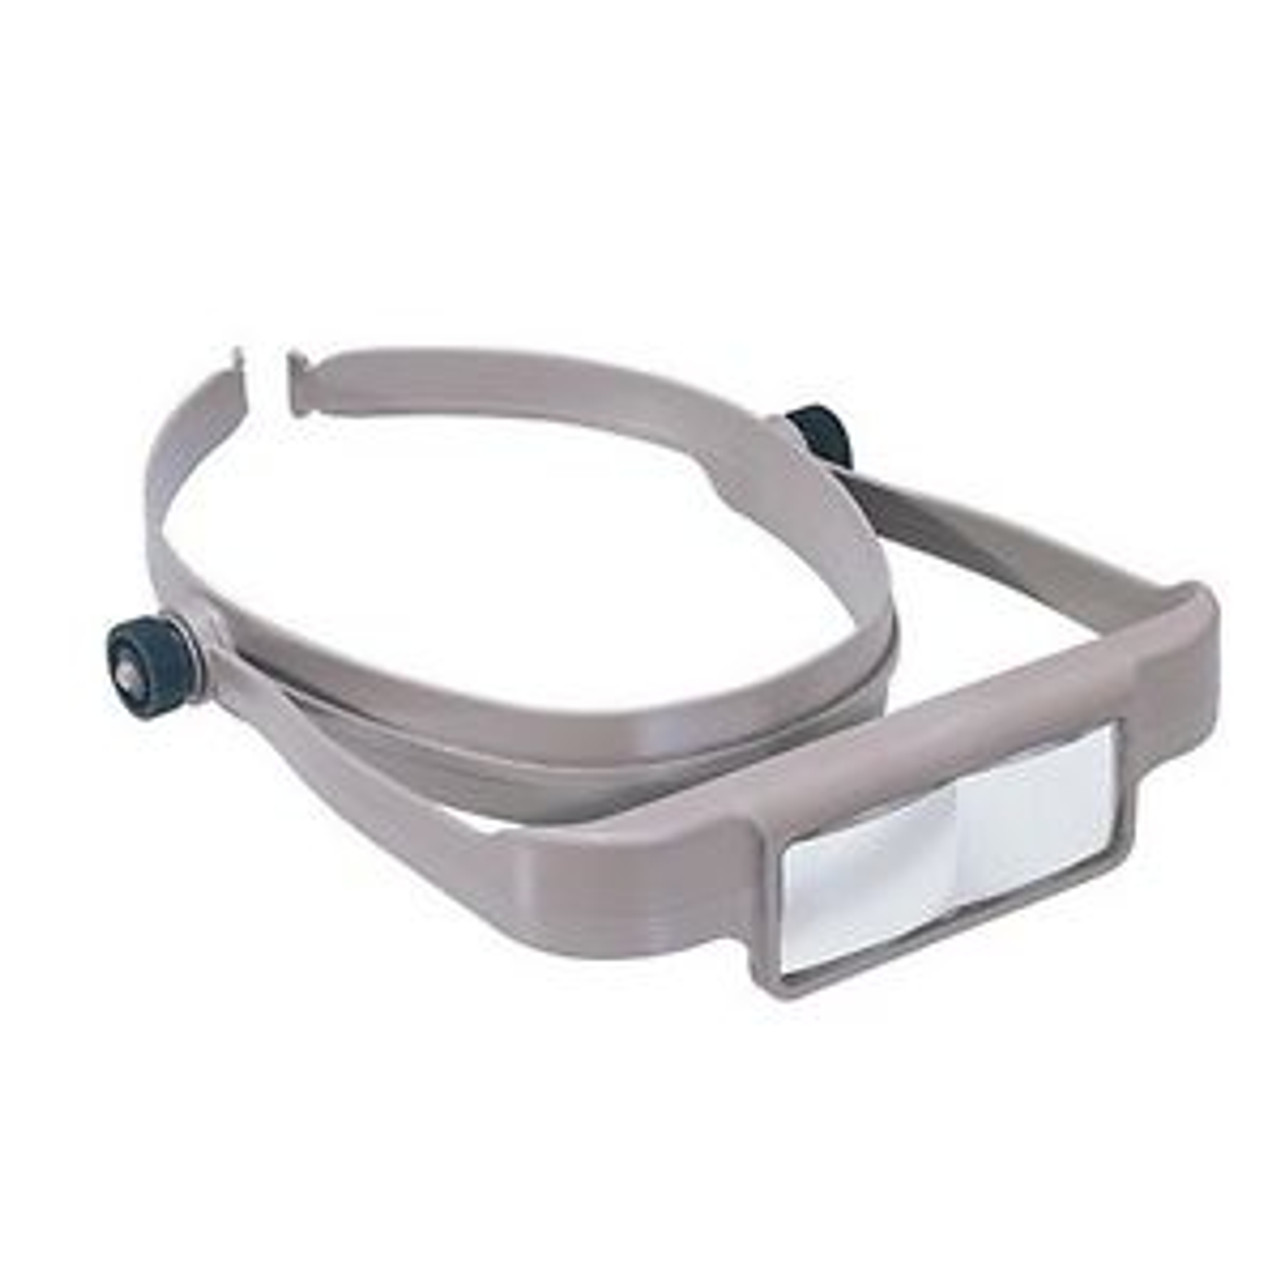 OptiSight Pro Headband Magnifier with LEDs and Lenses 1x, 1.5x, 2x